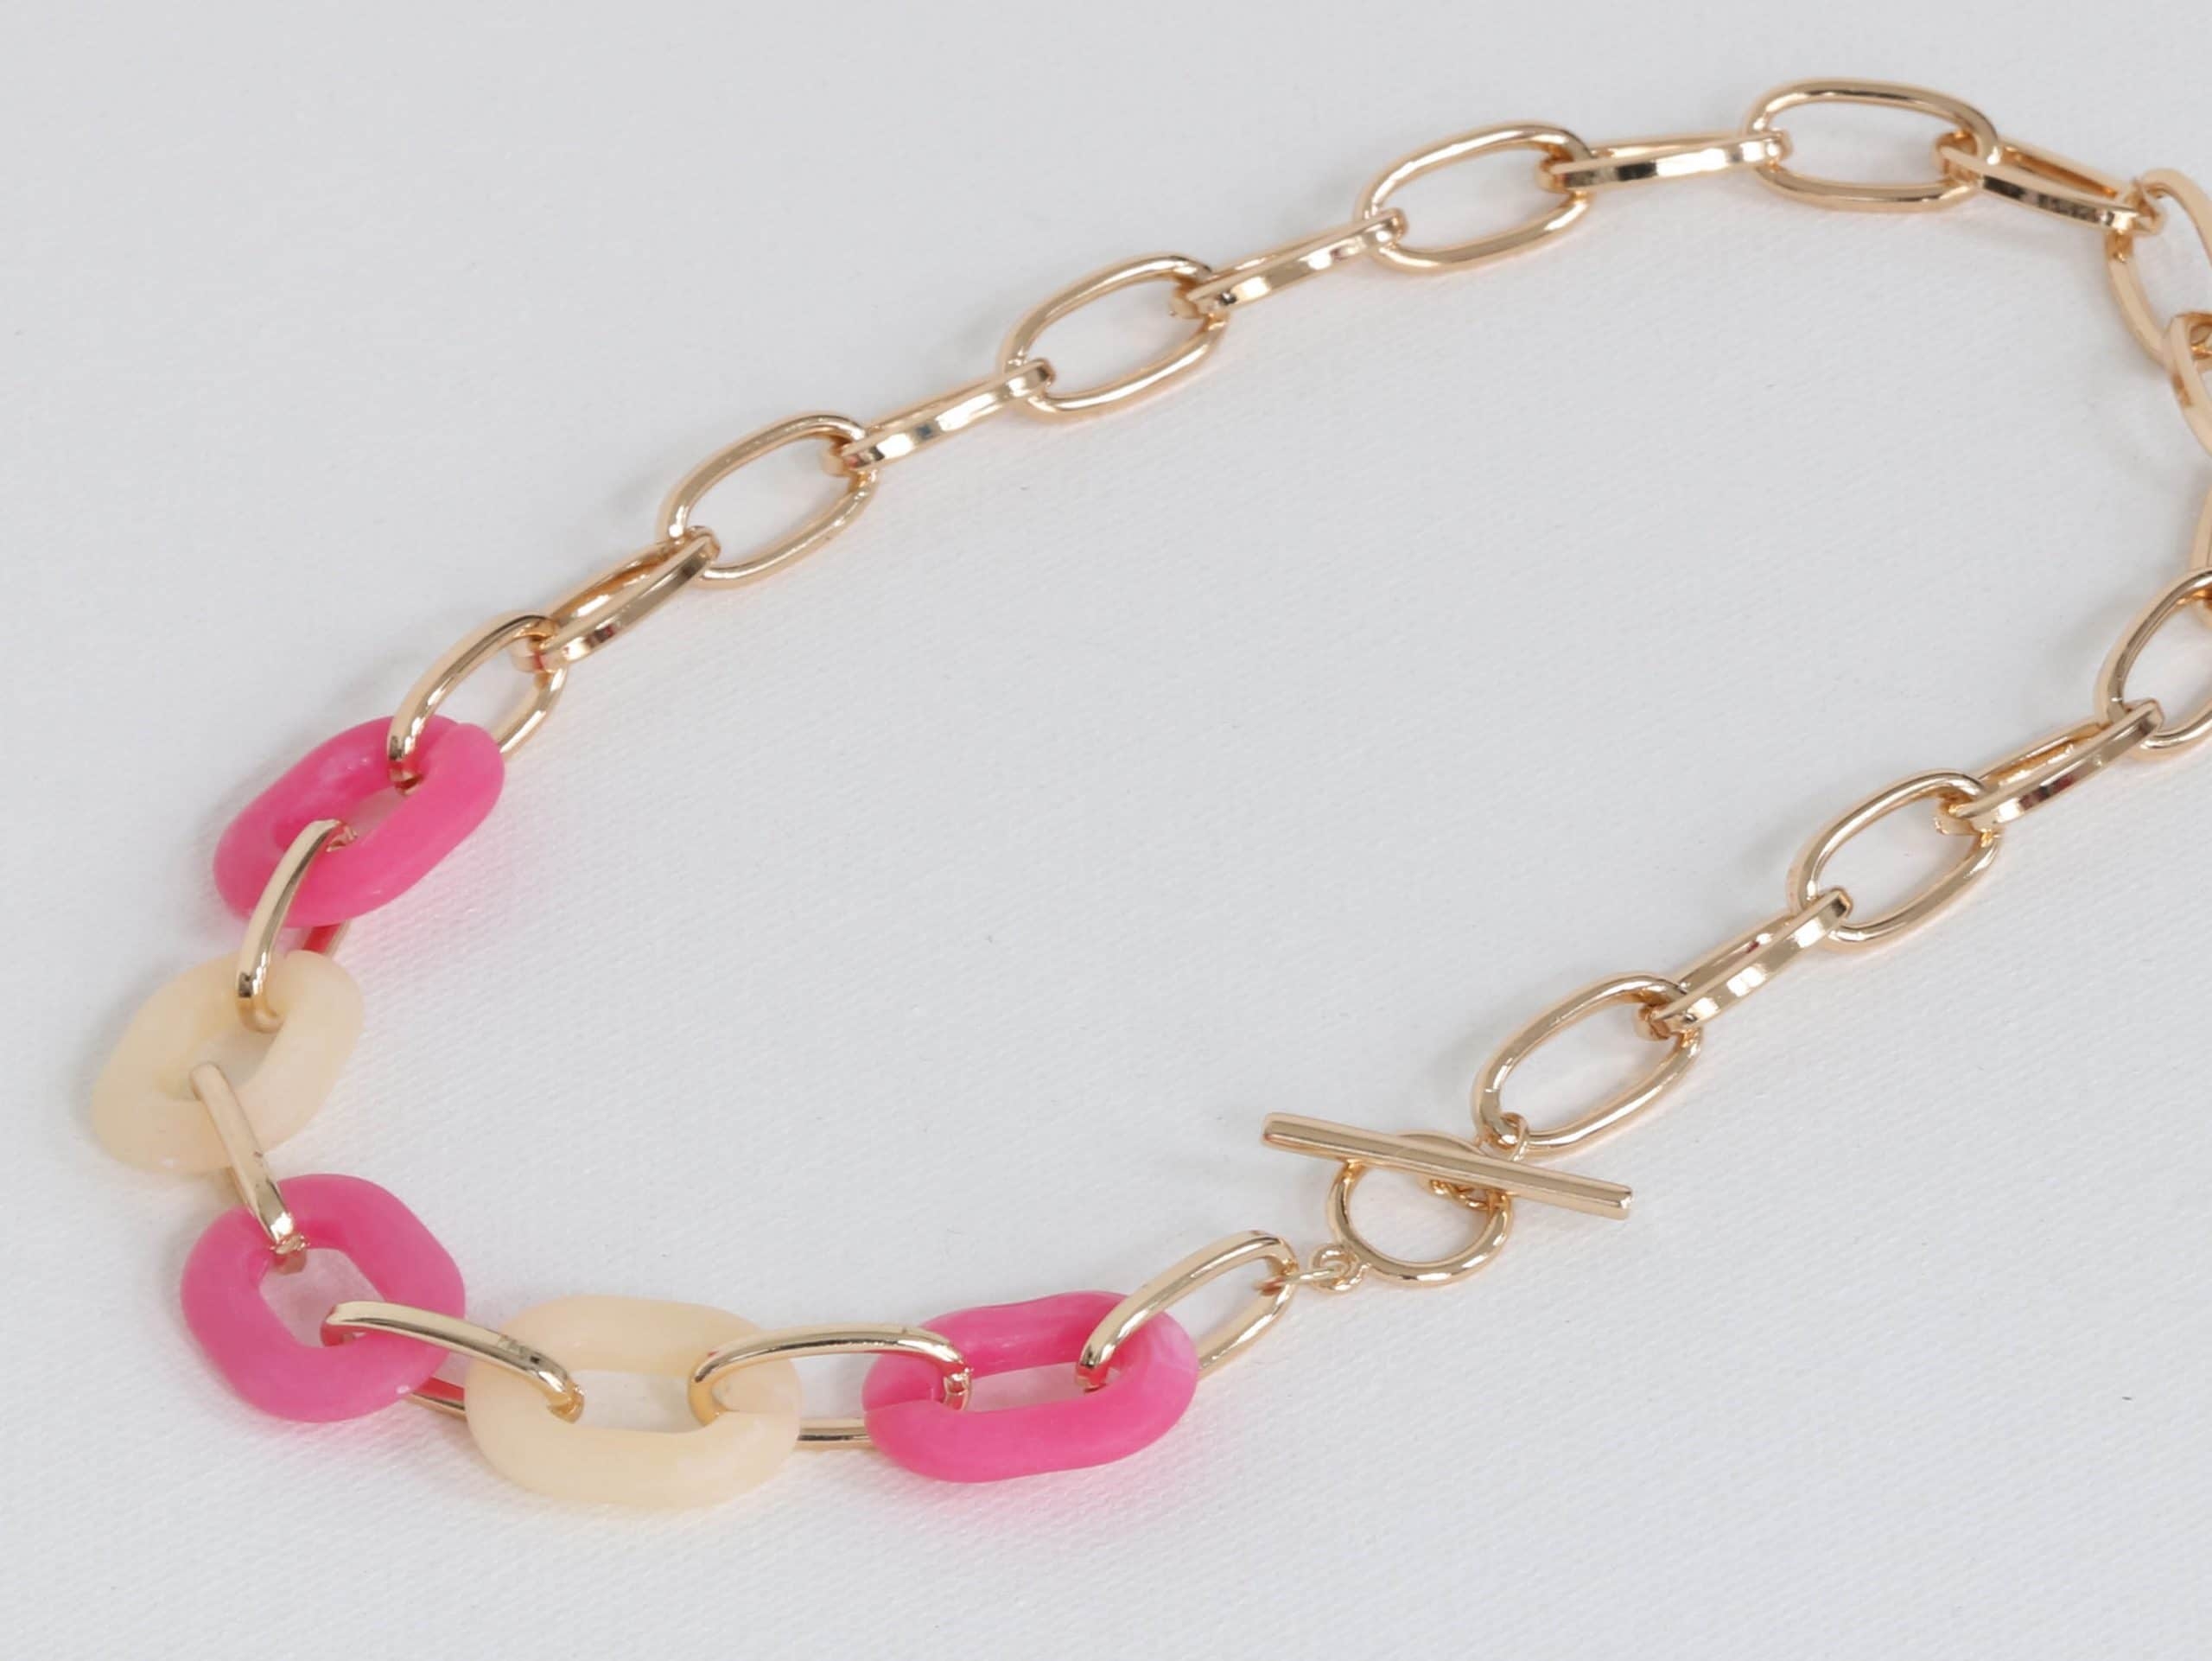 Petra Matte Resin Chain Necklace in Pink – Big Metal London